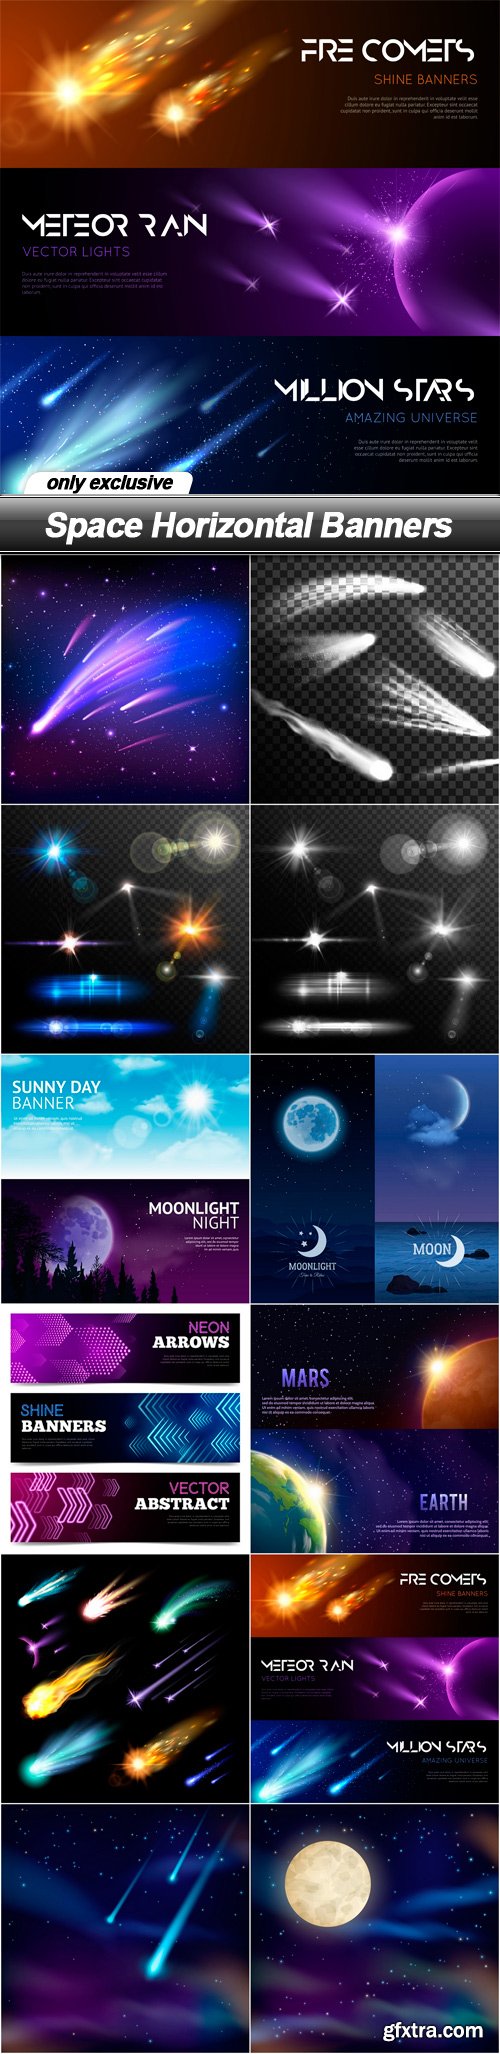 Space Horizontal Banners - 12 EPS